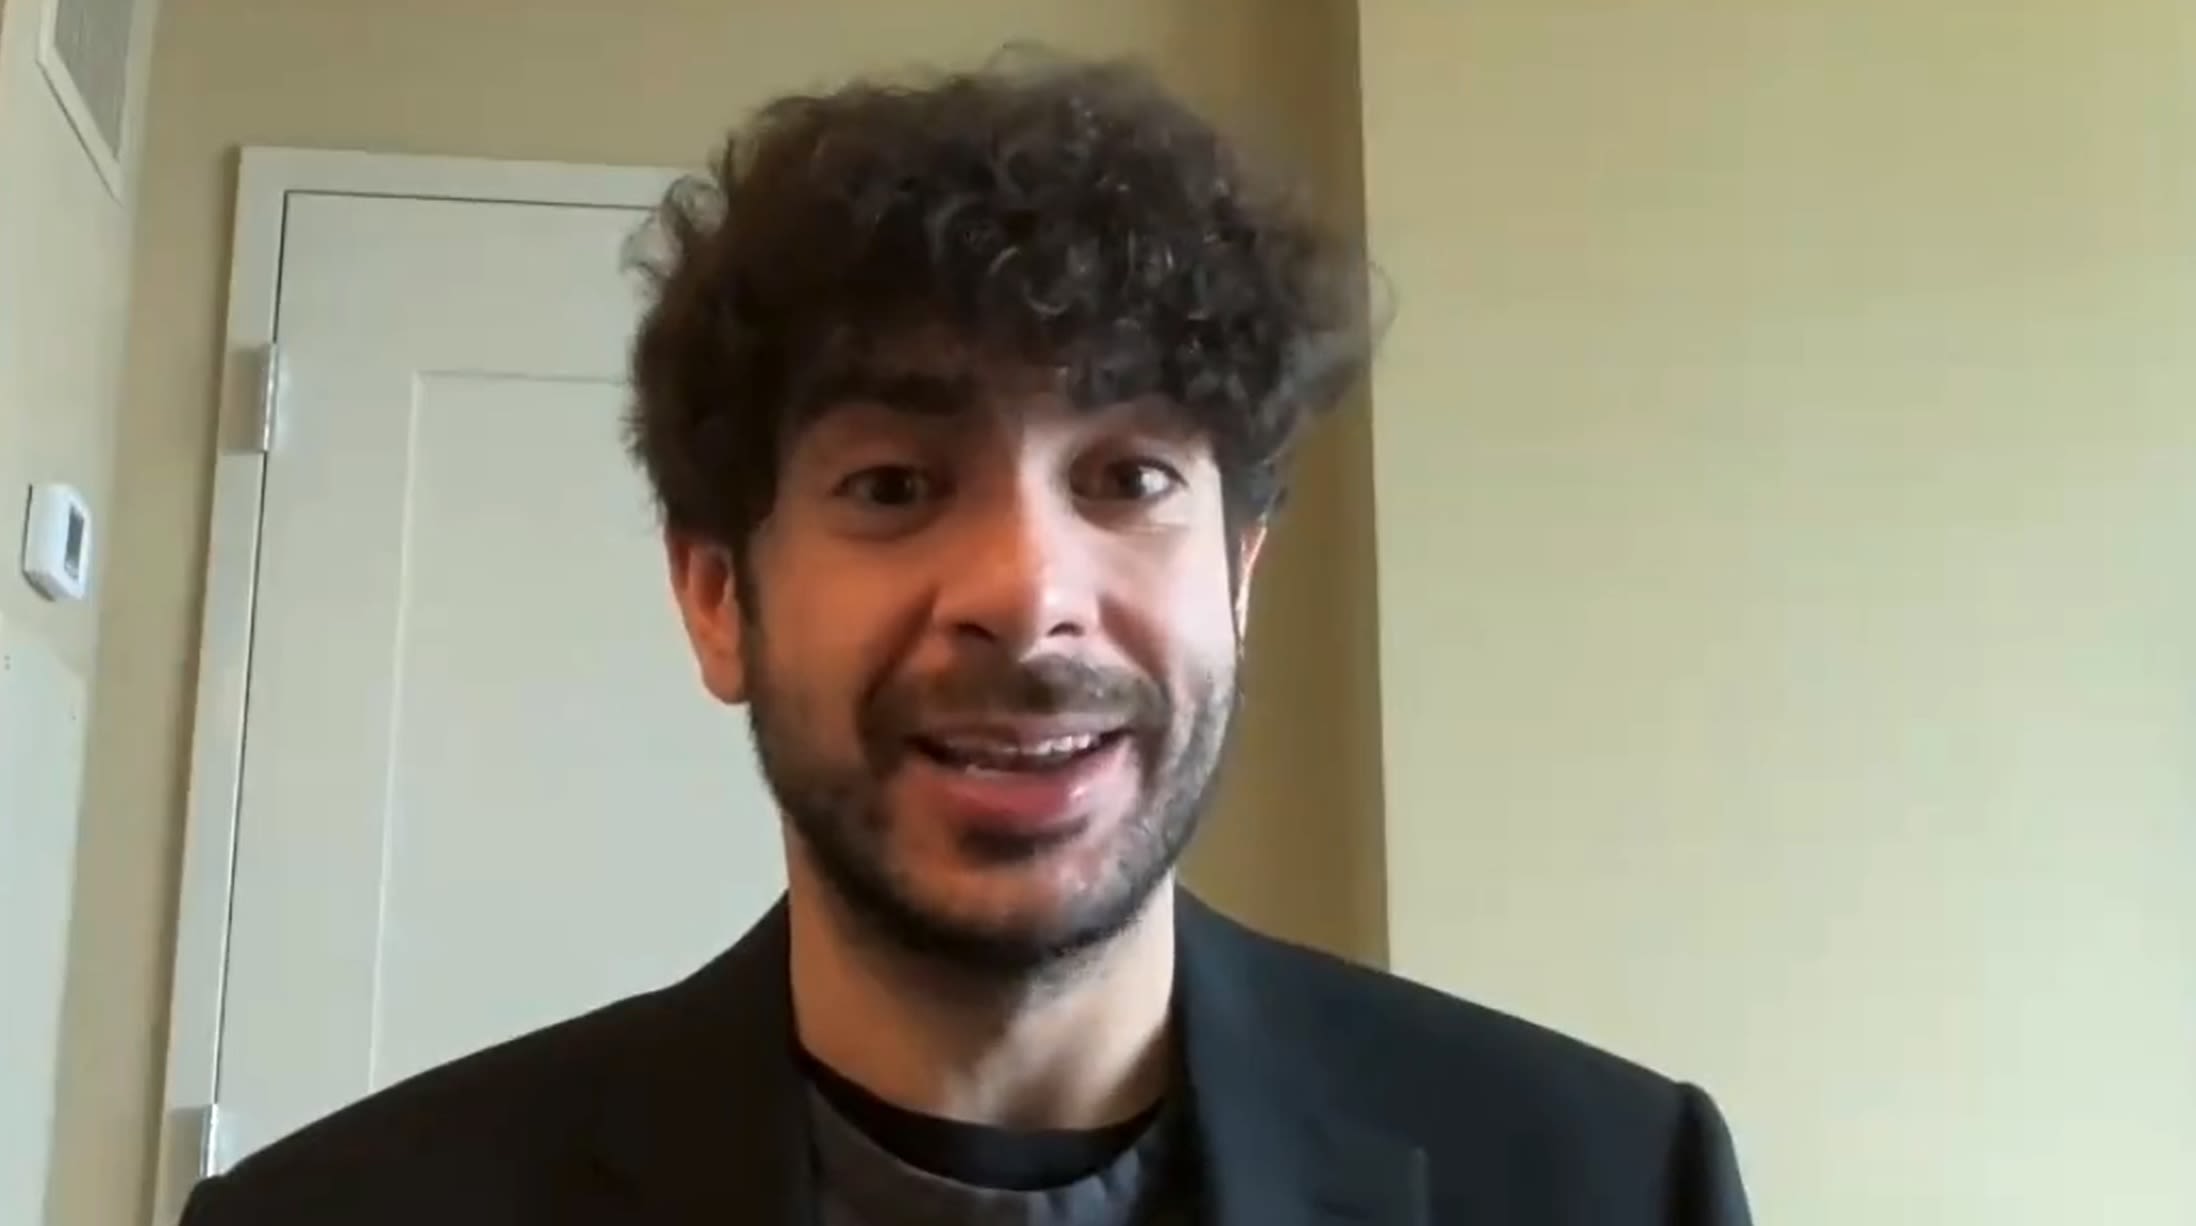 Tony Khan On When He Decided To Launch AEW, Recalls Early Conversation With TBS/TNT President - PWMania - Wrestling News